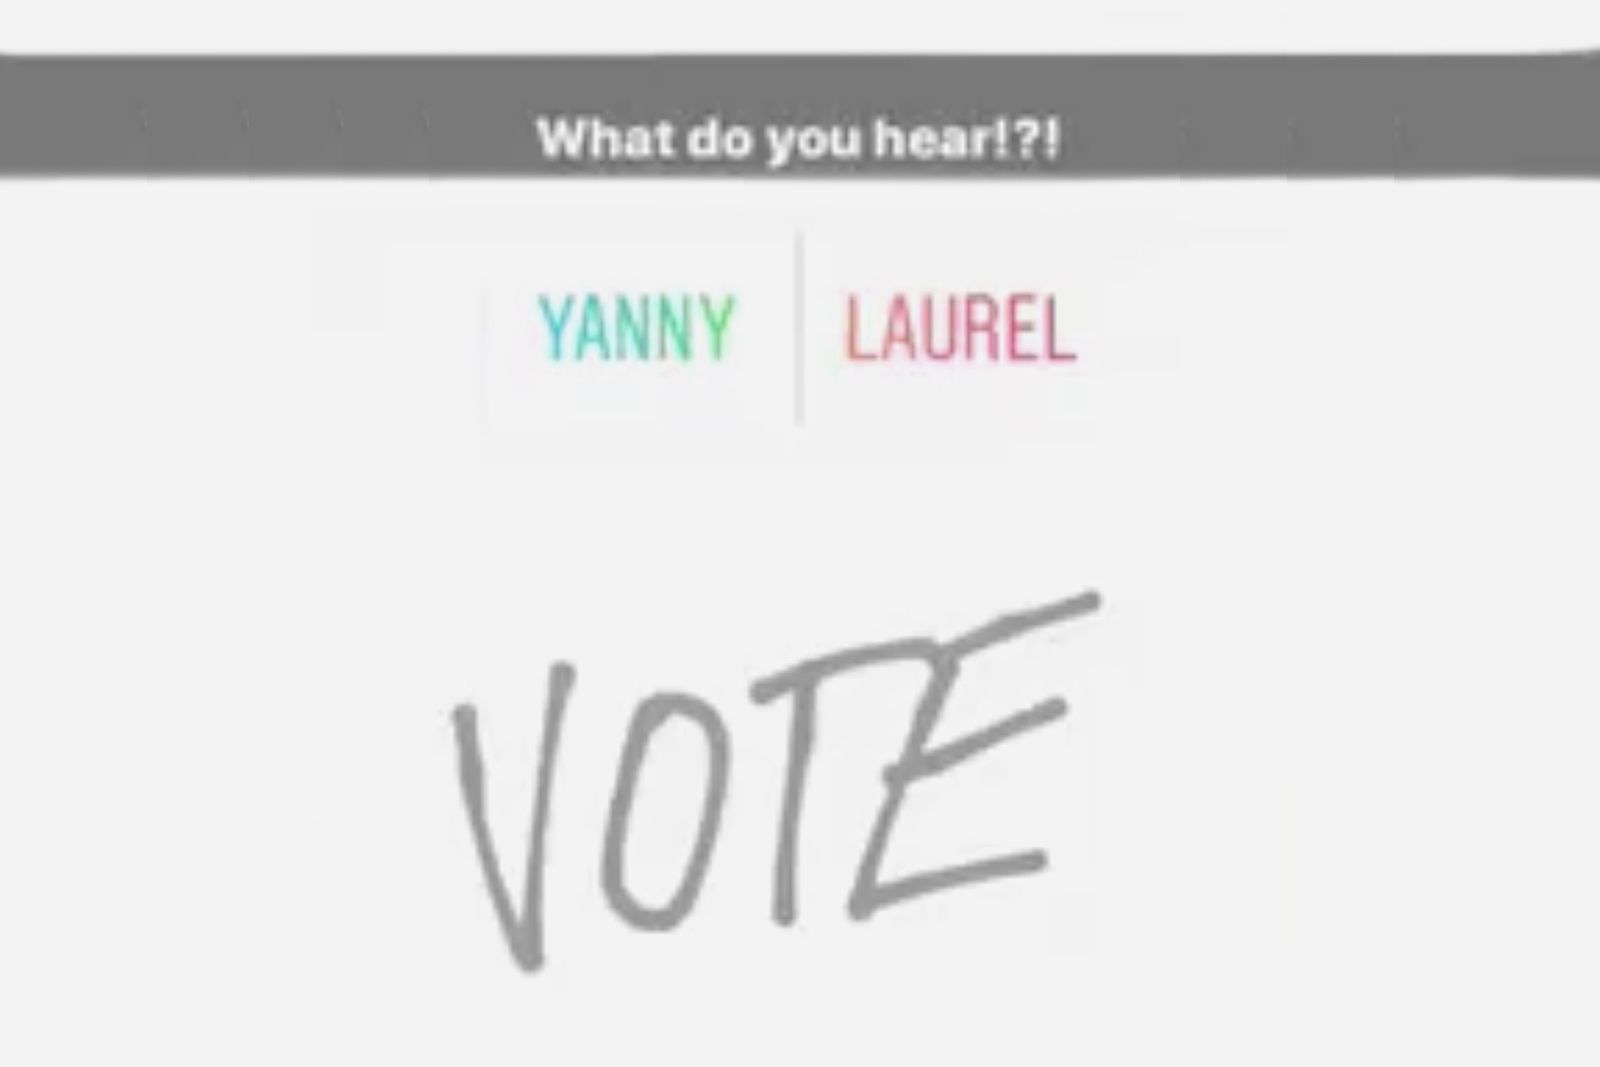 Do you hear yanny or laurel This audio clip is just like that dress image 1